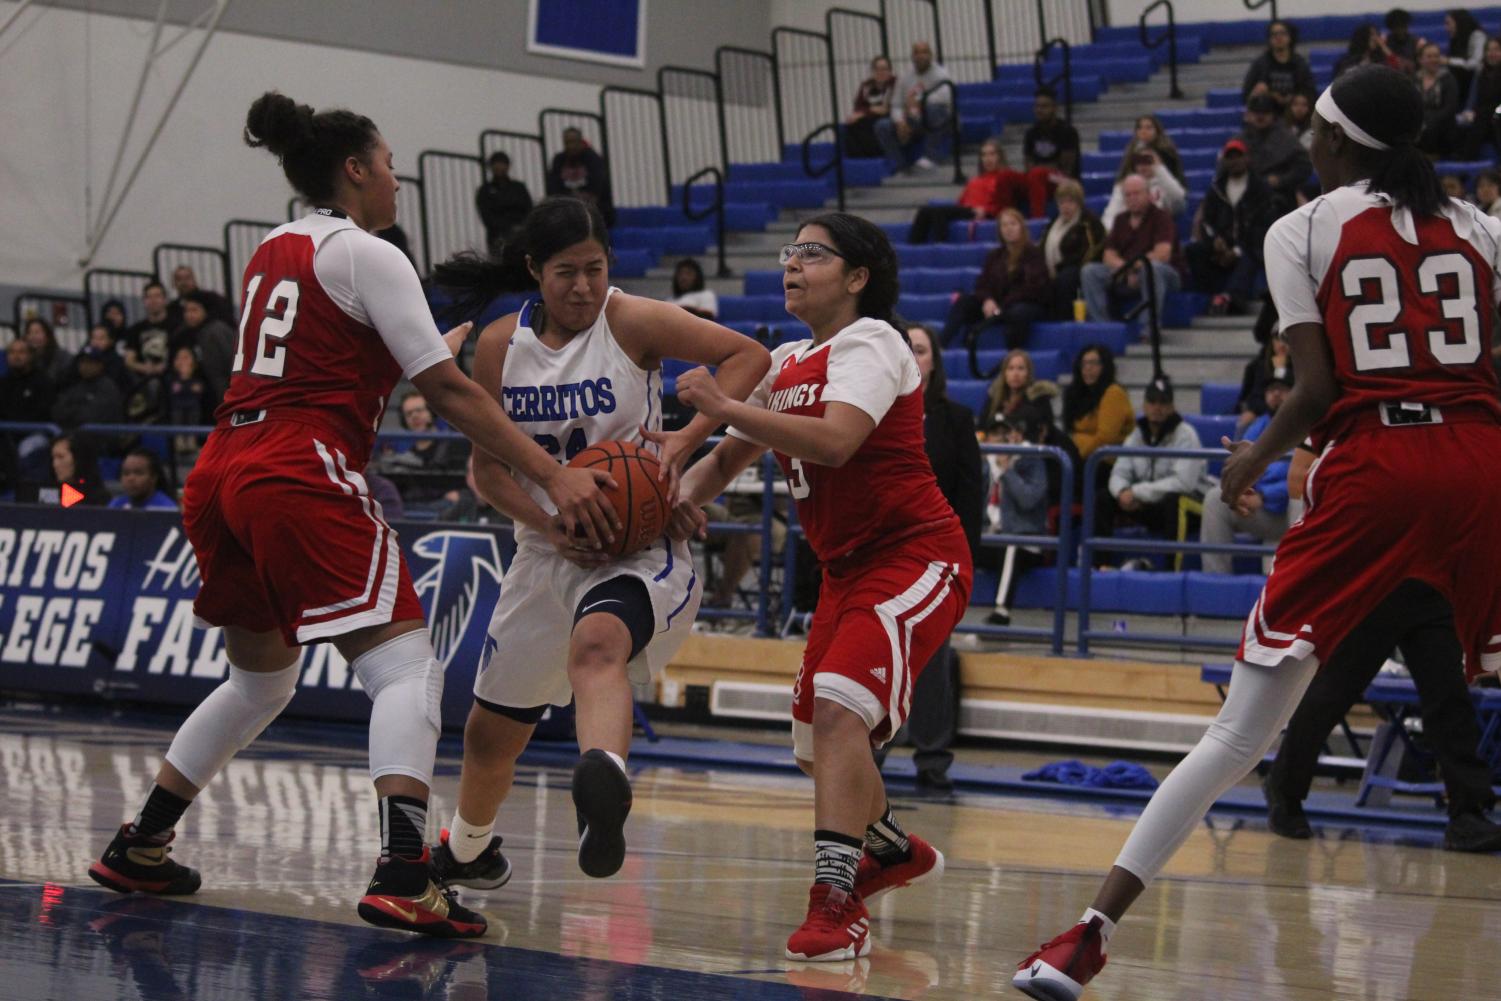 Sophomore guard No. 24 Serena Rendon fighting through the contact to get to the basket. Rendon finished the game with 17 points and seven rebounds in the game at Cerritos College against Long Beach City College on Feb. 8, 2019.